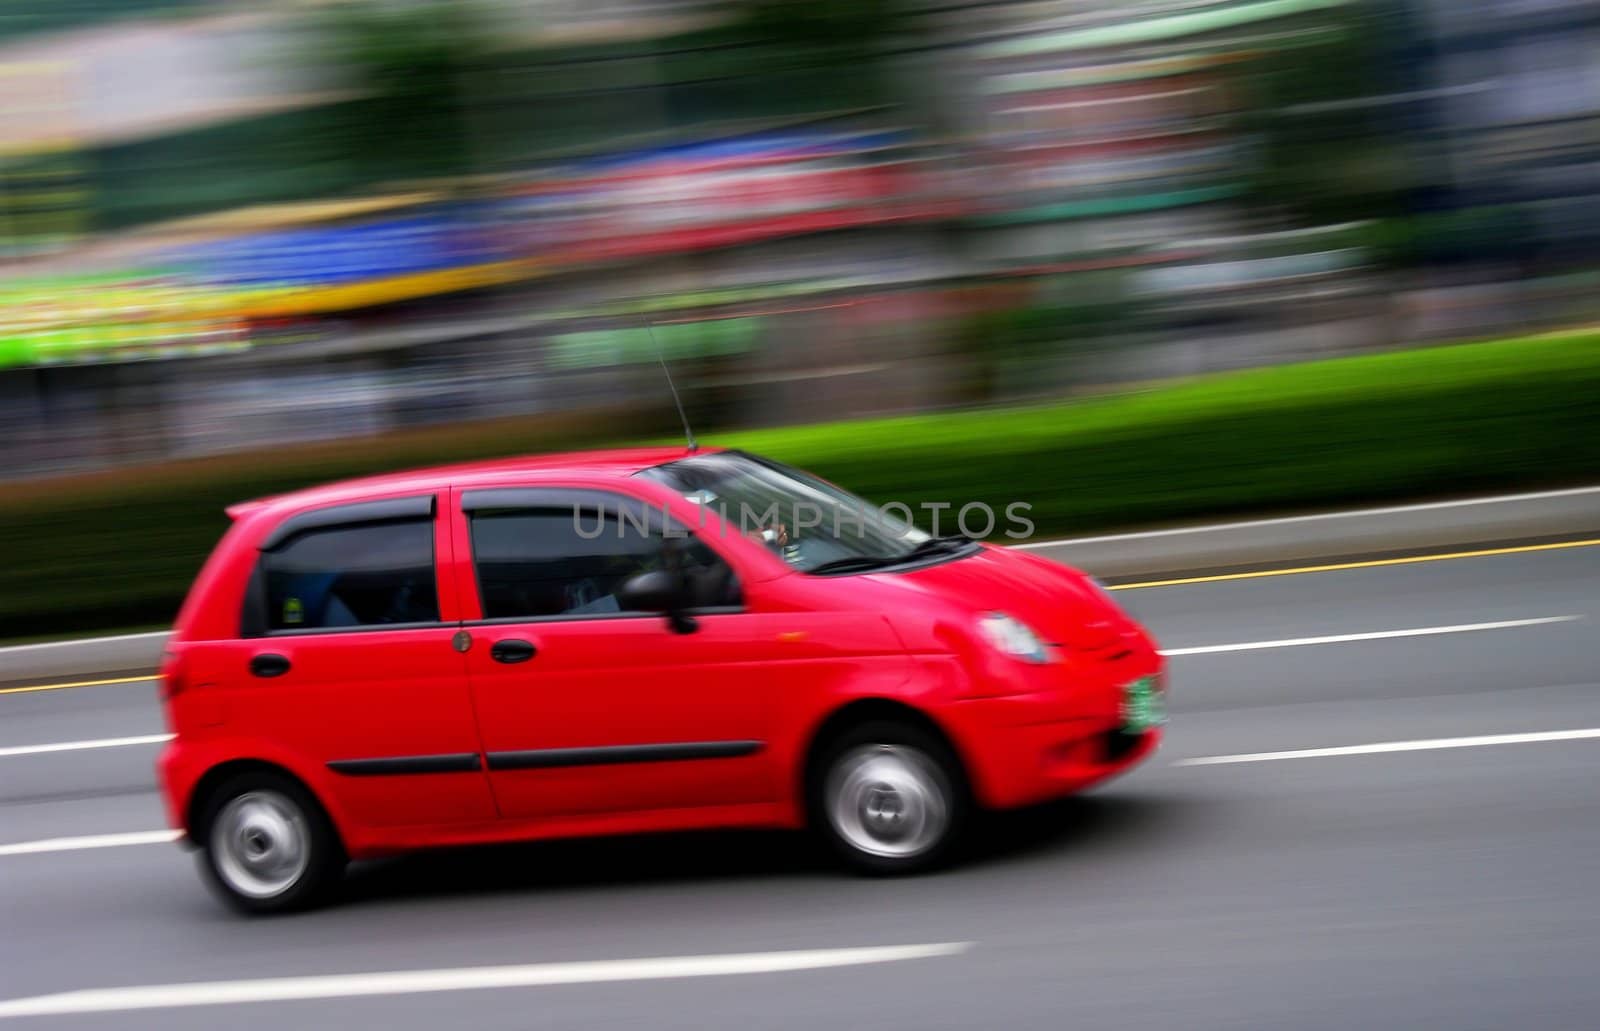 A red car speeding through a city centre. Motion blur was used for effect.